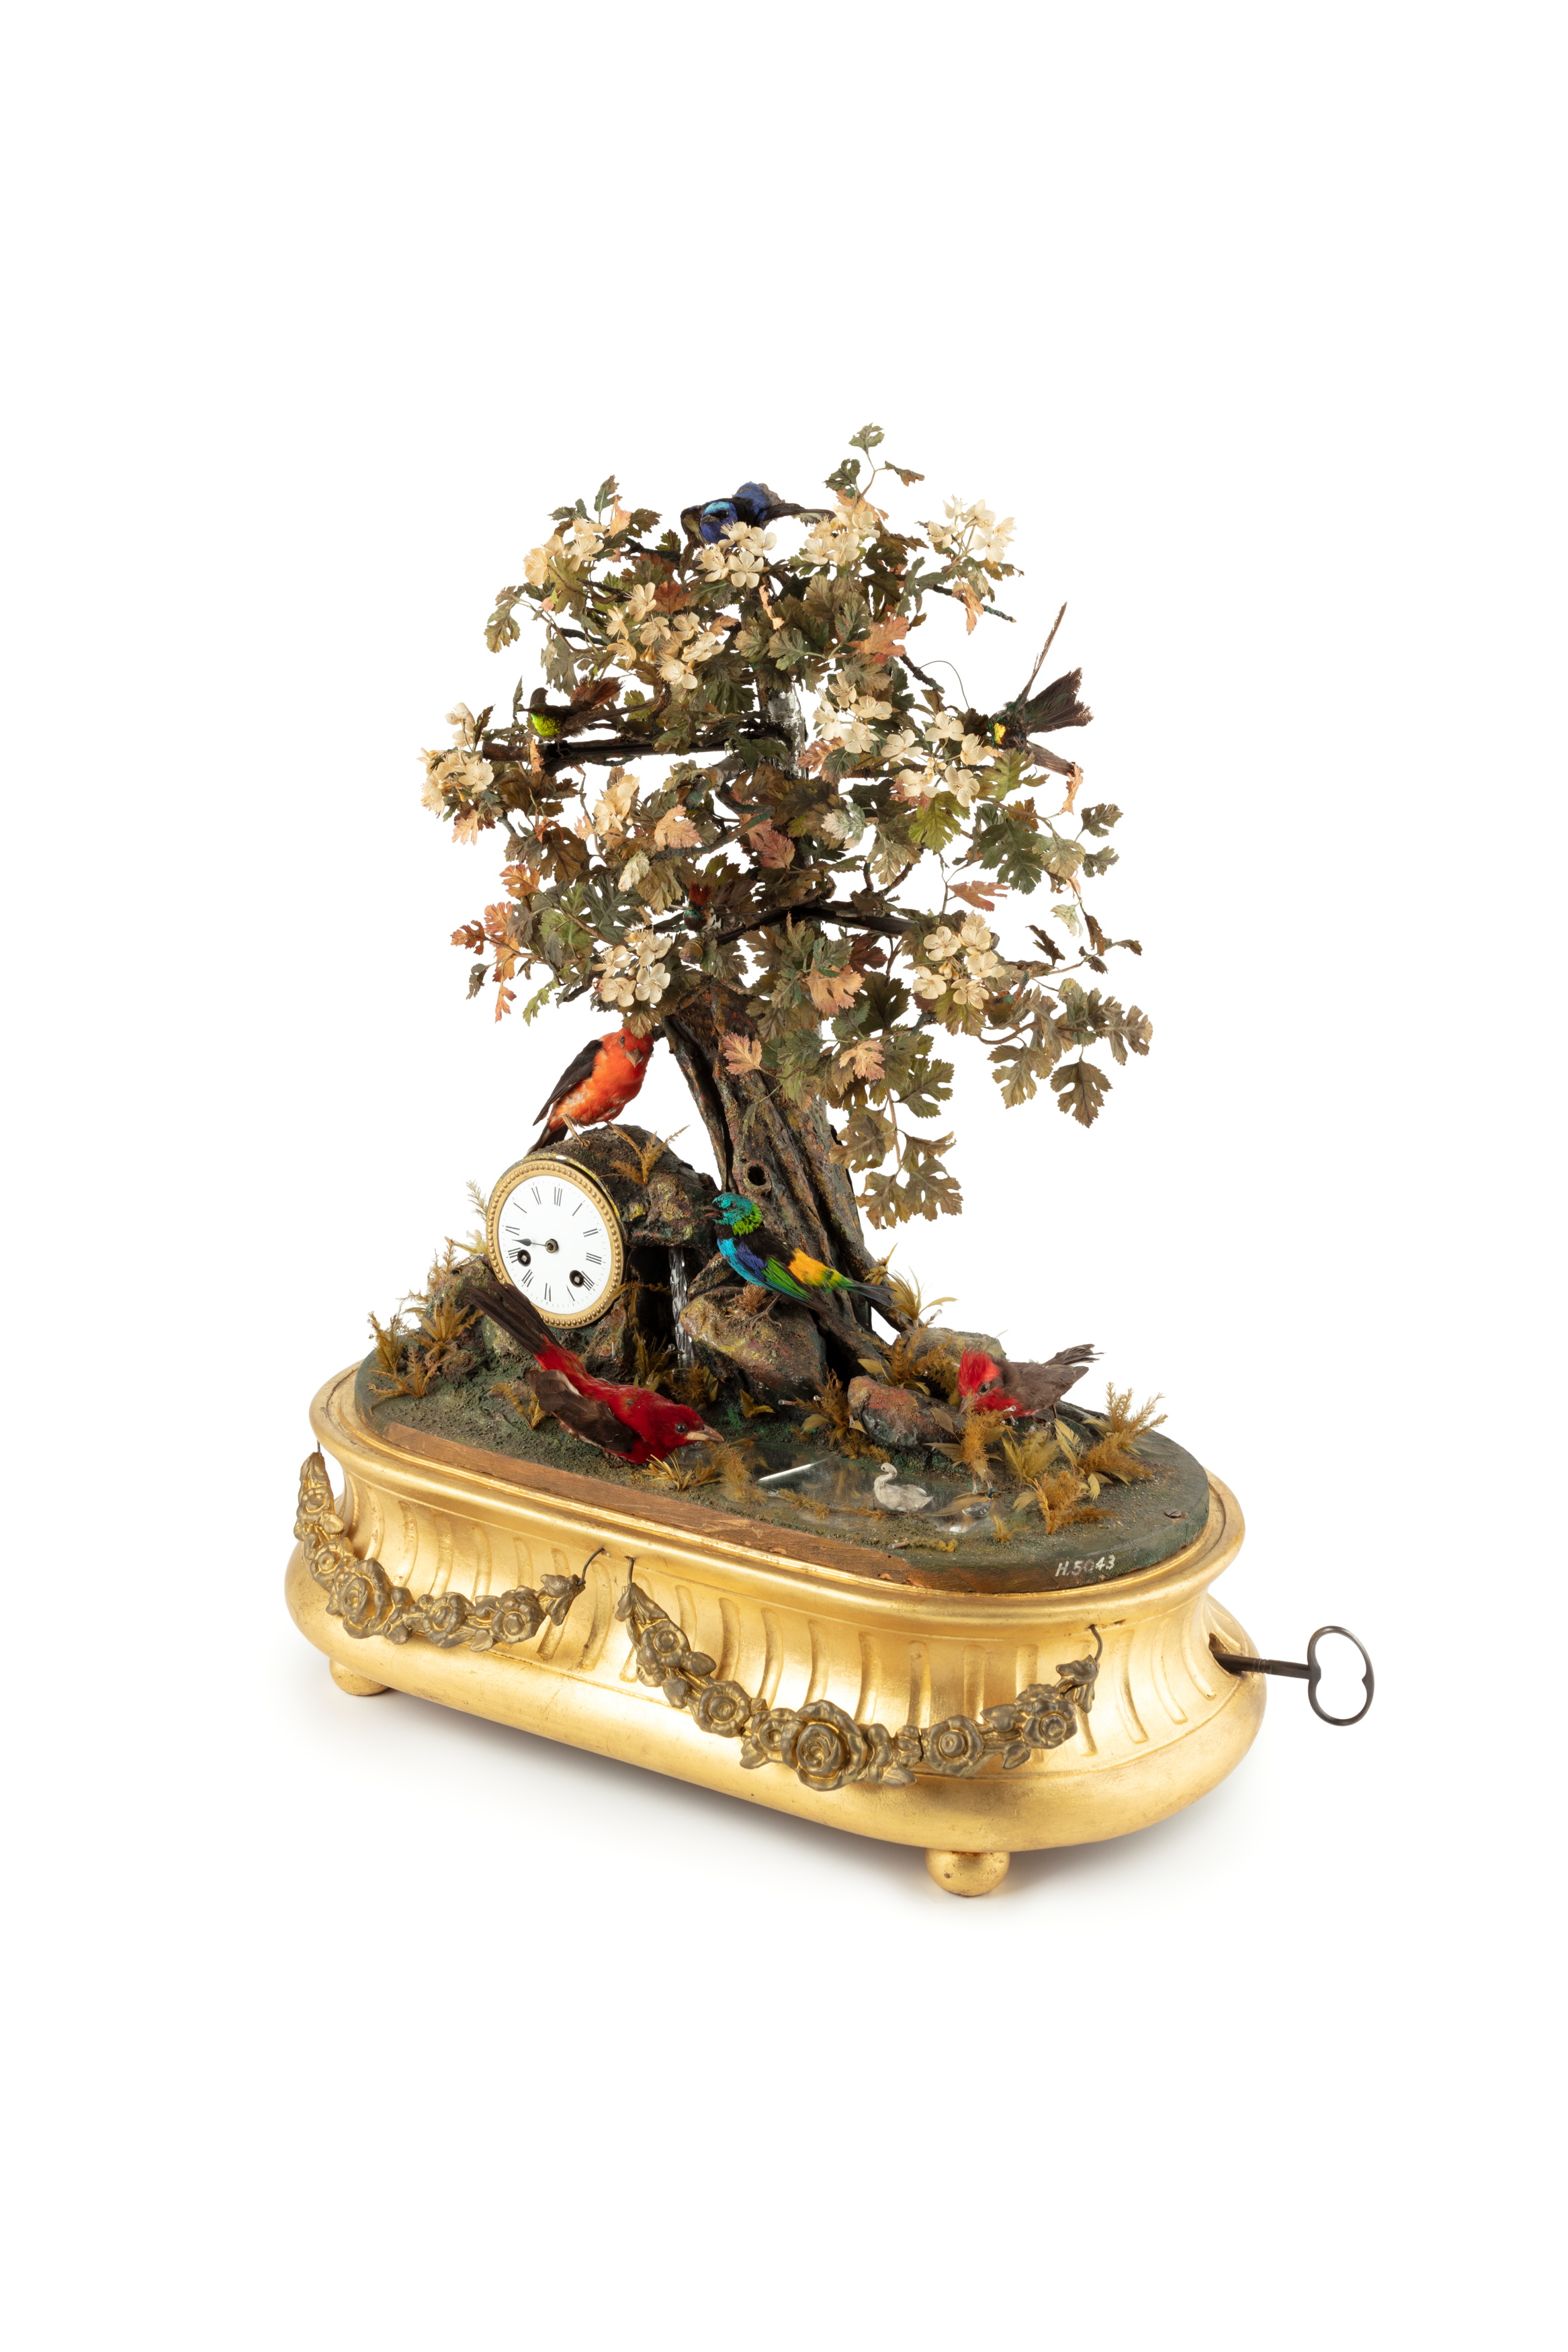 French musical automaton by Bontems family